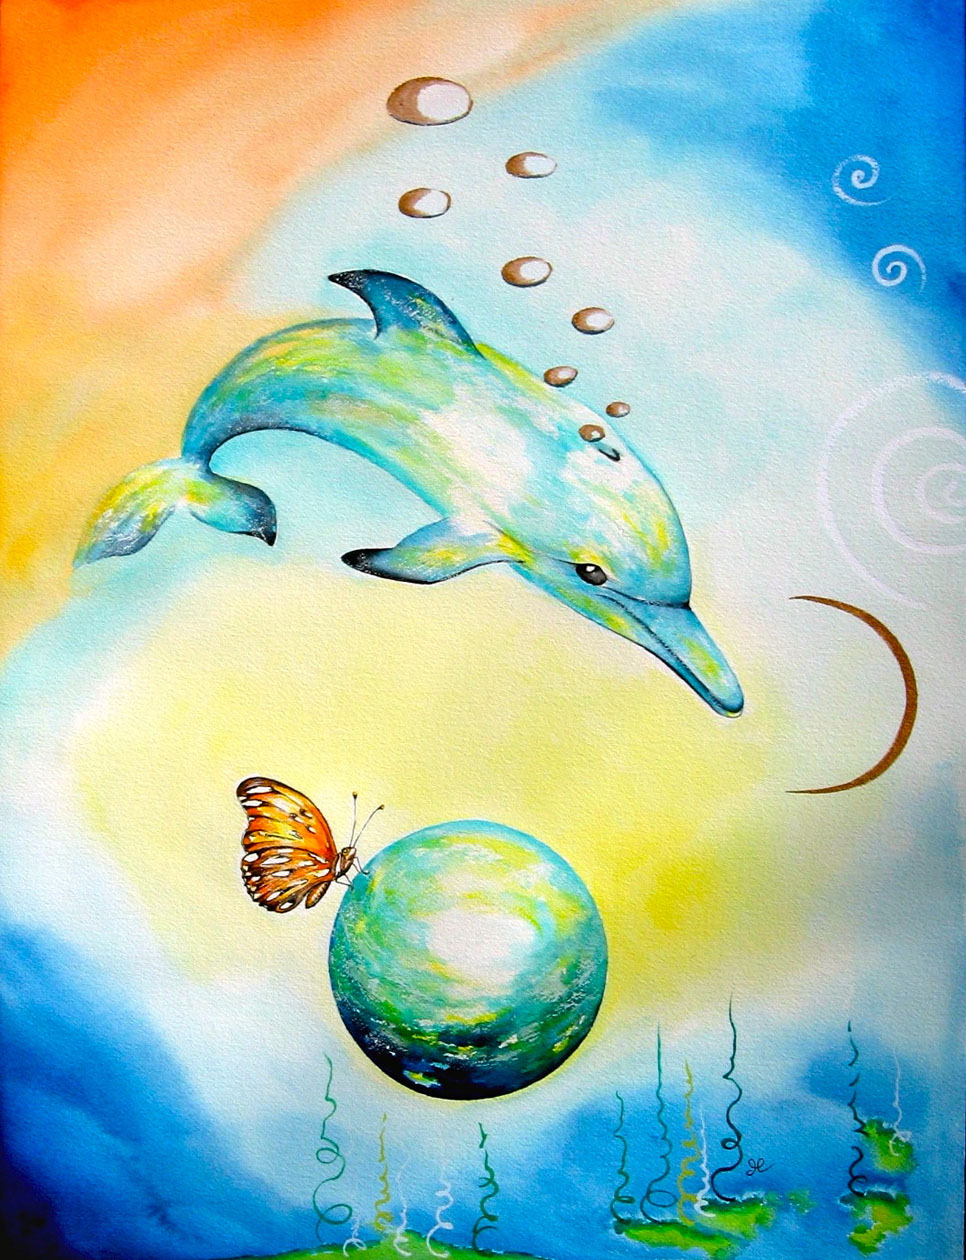 Dolphin3 by visionary artist Madeleine Tuttle